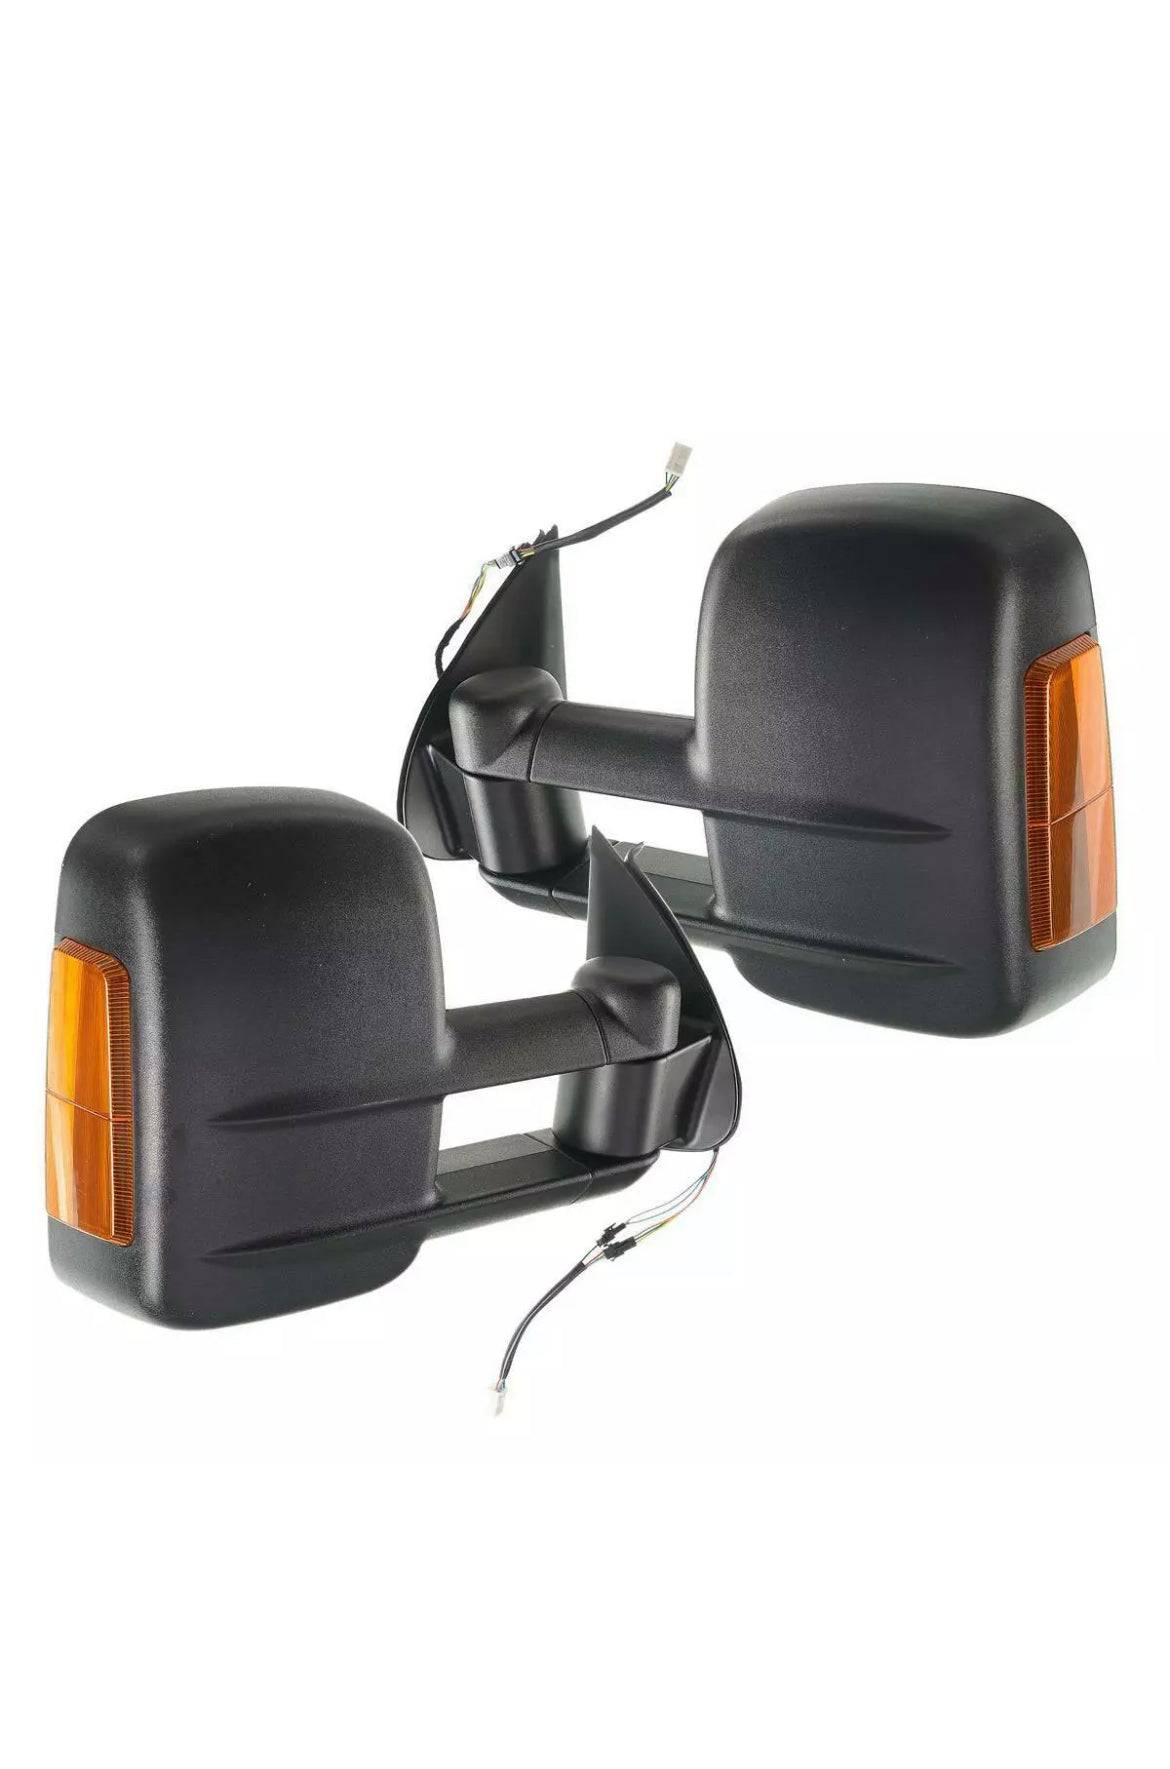 Extendable Towing Mirror Suits Toyota Hilux 2005-2015 (Blinker)